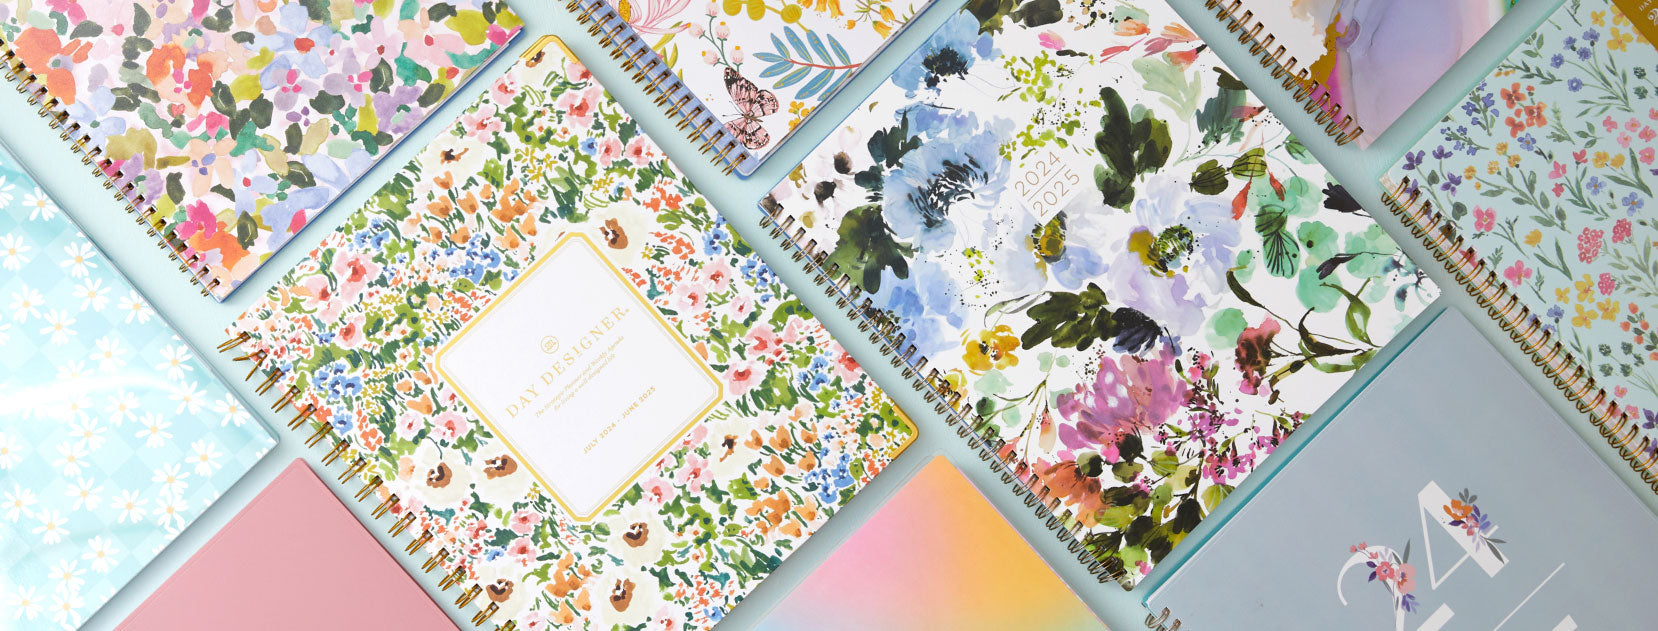 Brighten up your day with floral and trendy planners, ideal for keeping your thoughts and schedule organized.